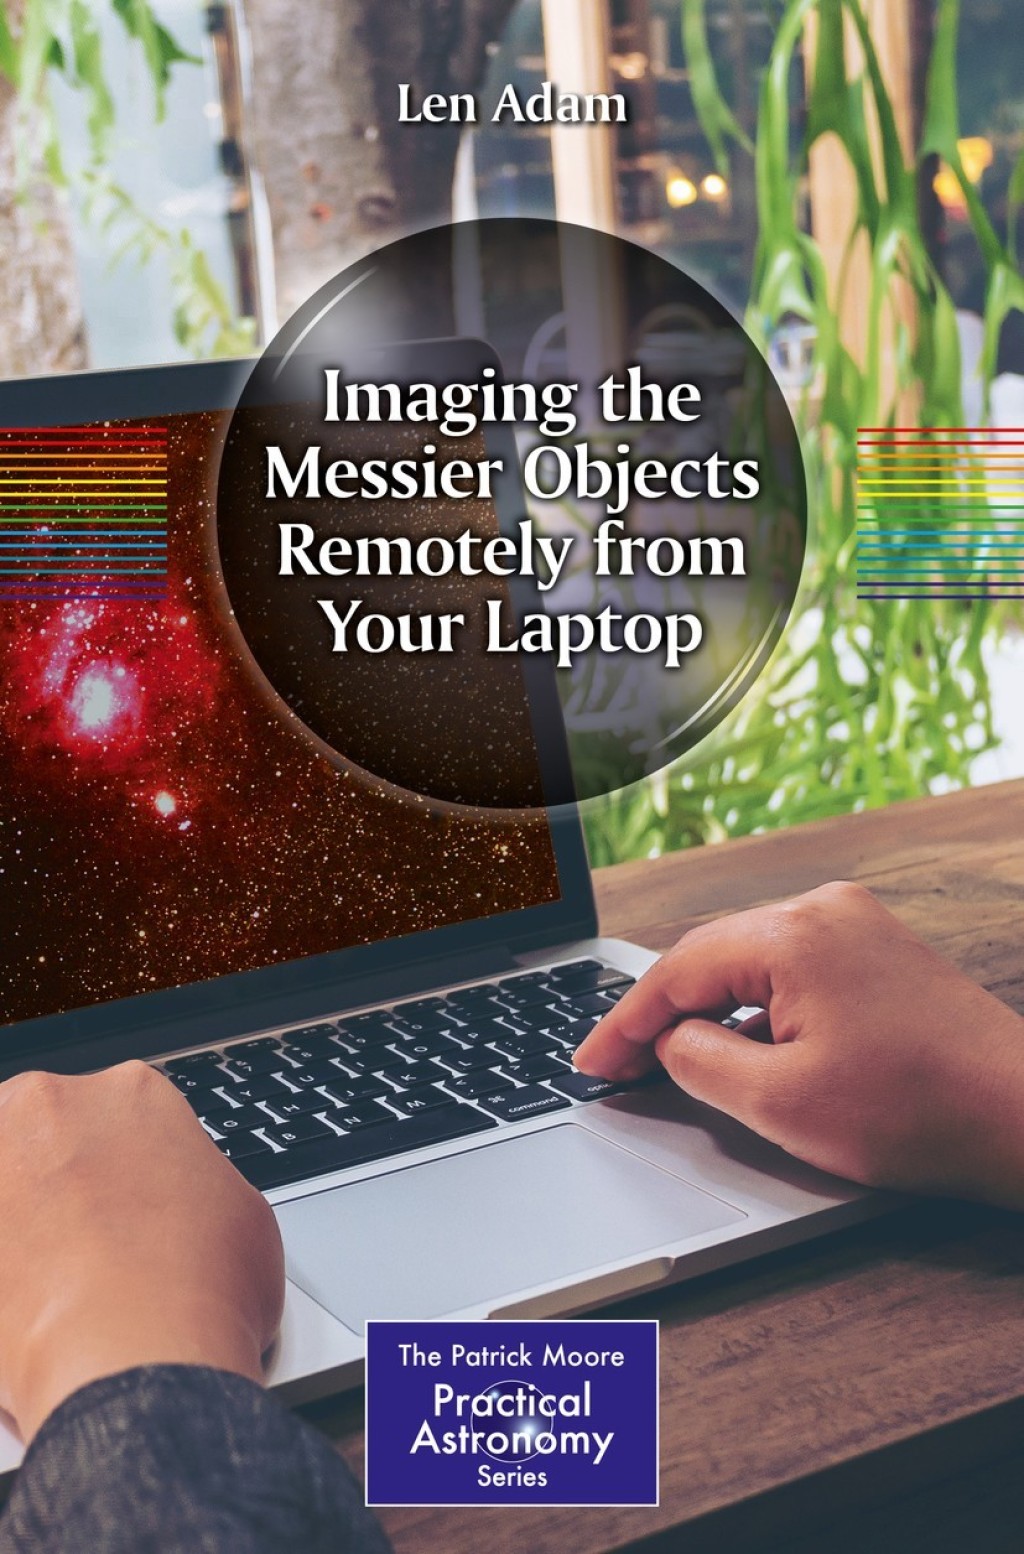 Imaging the Messier Objects Remotely from Your Laptop (eBook) - Len Adam